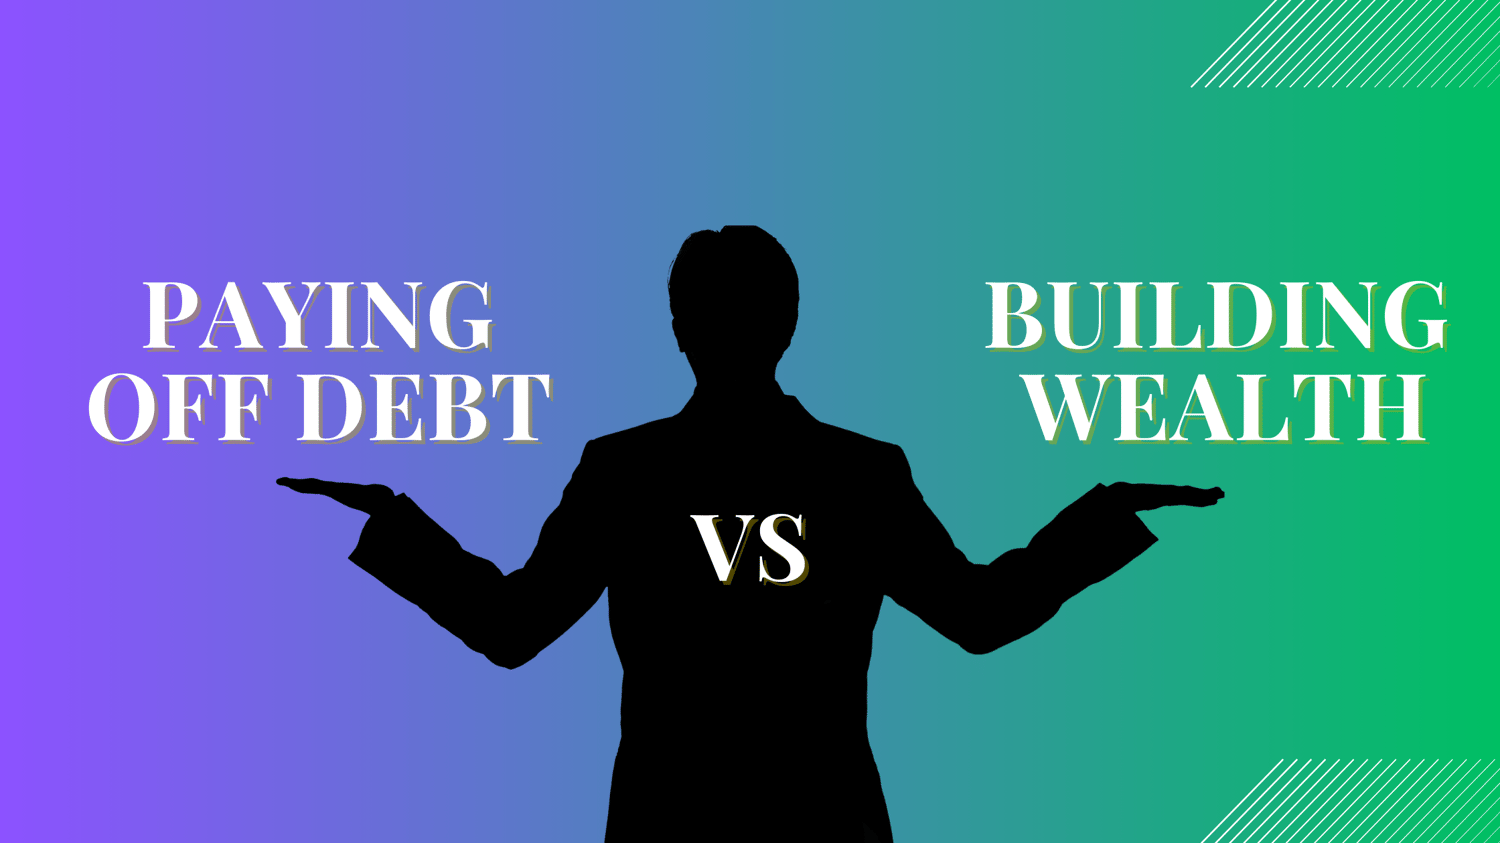 PAYING OFF DEBT VS BUILDING WEALTH